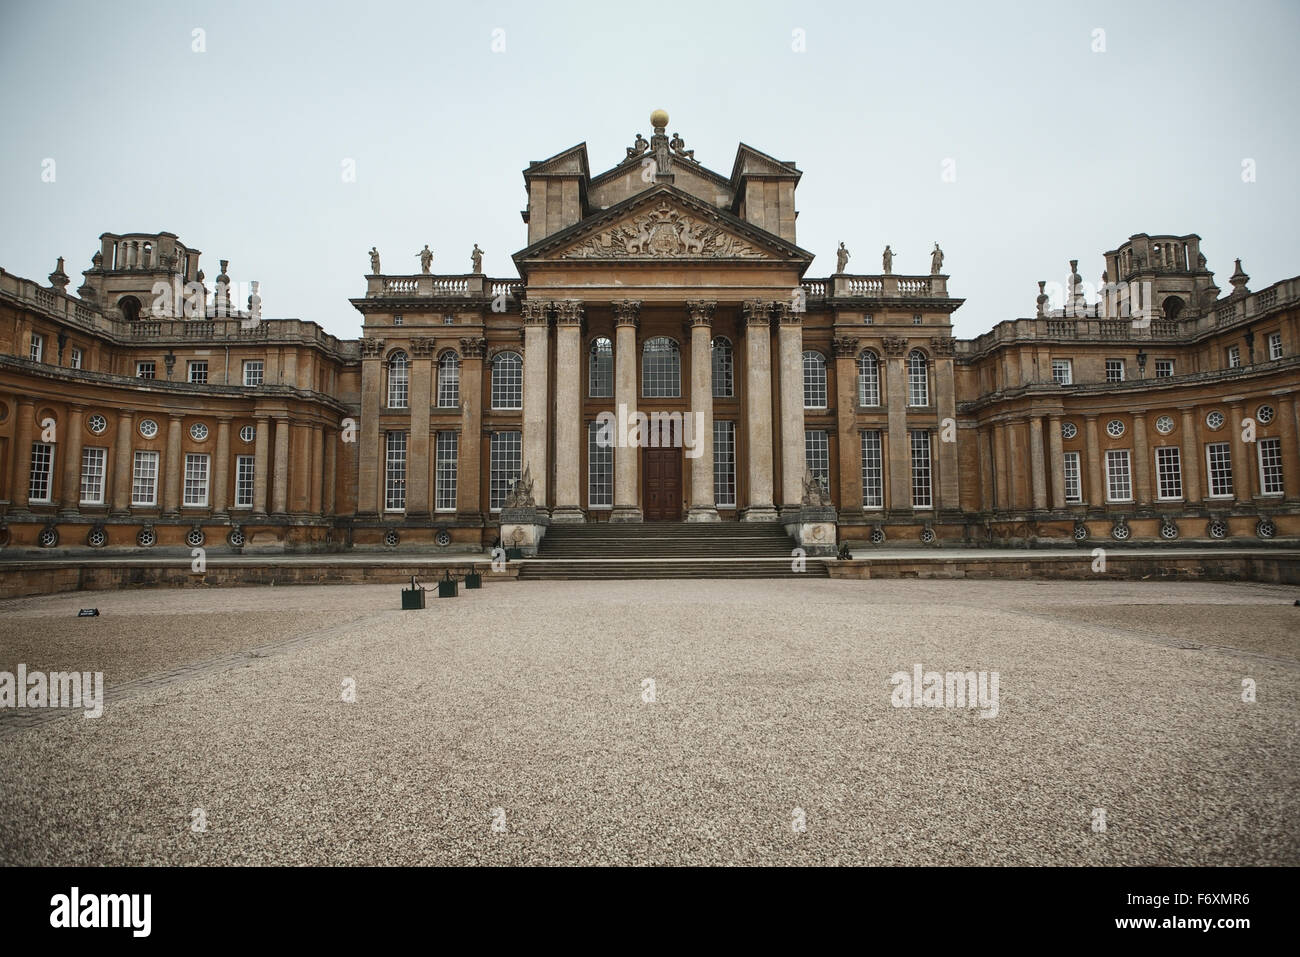 View from front of Blenheim Palace, England Stock Photo